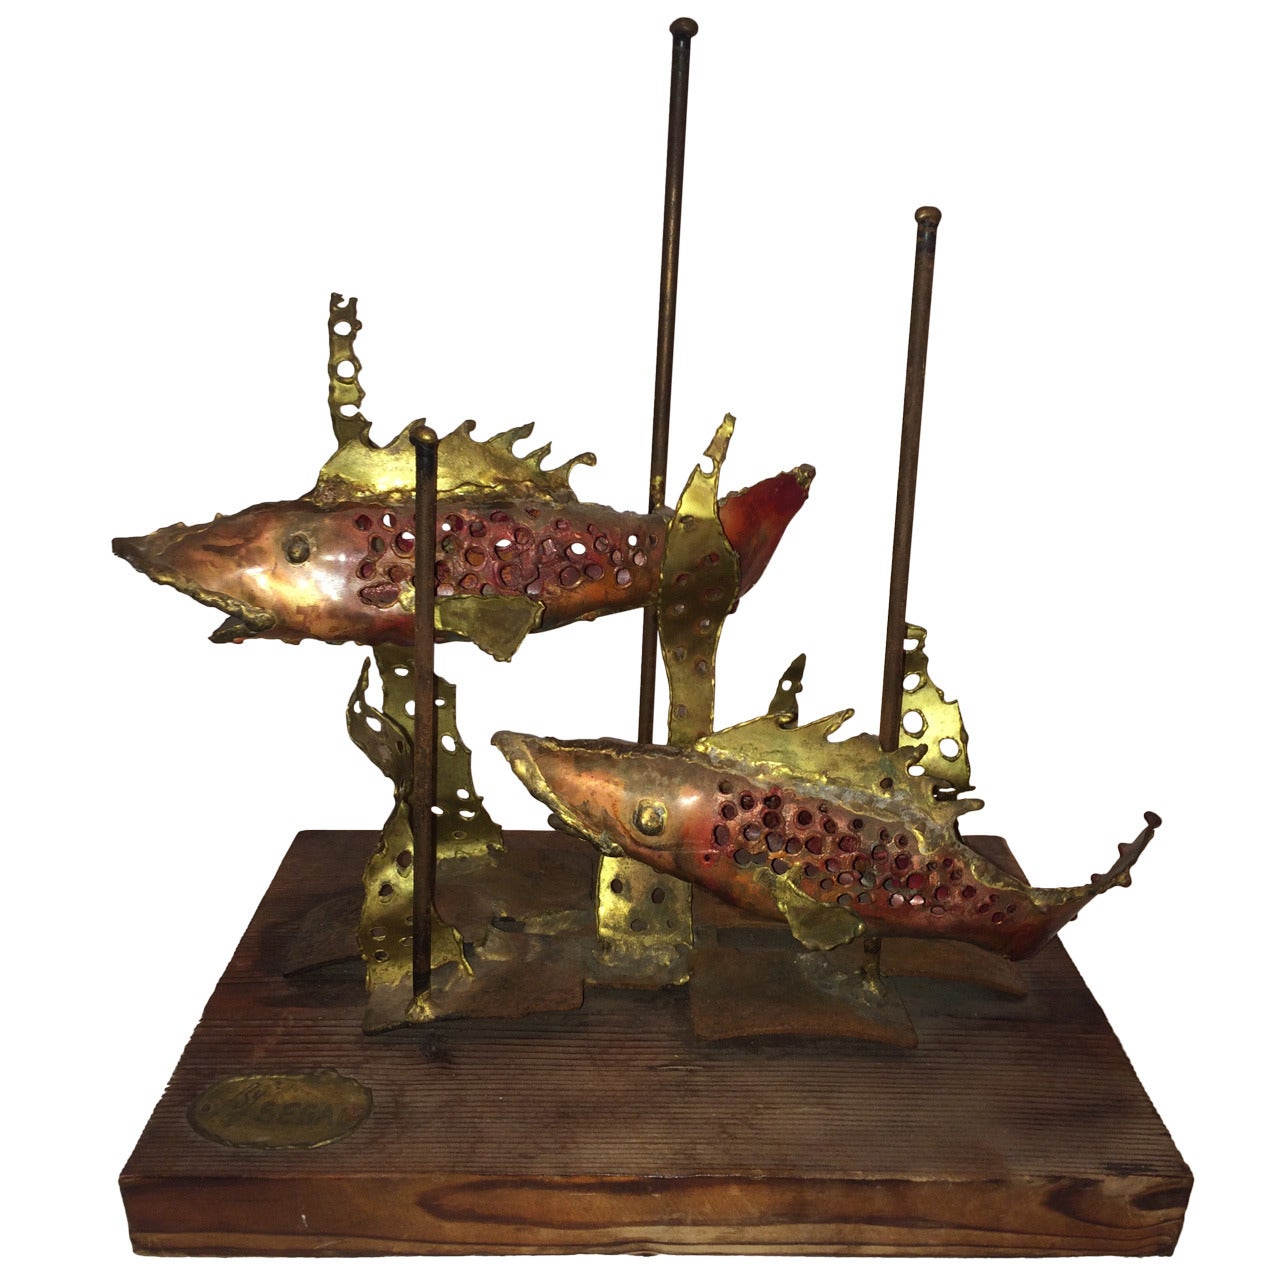 Signed Brutalist Sculpture of Fish by Segal